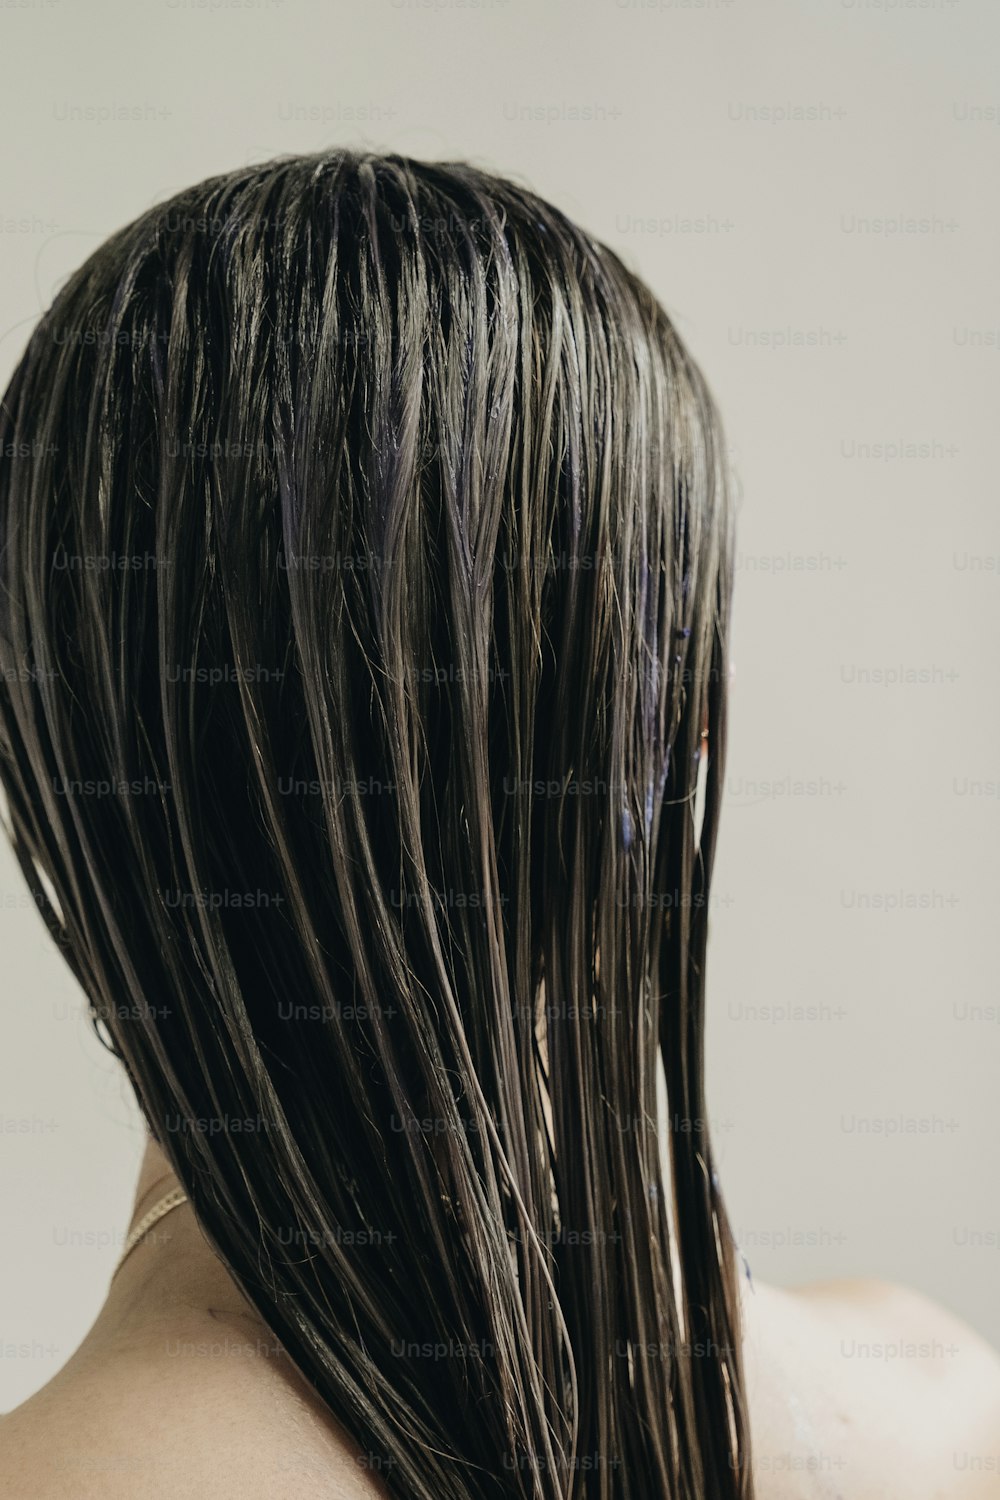 the back of a woman's head with wet hair